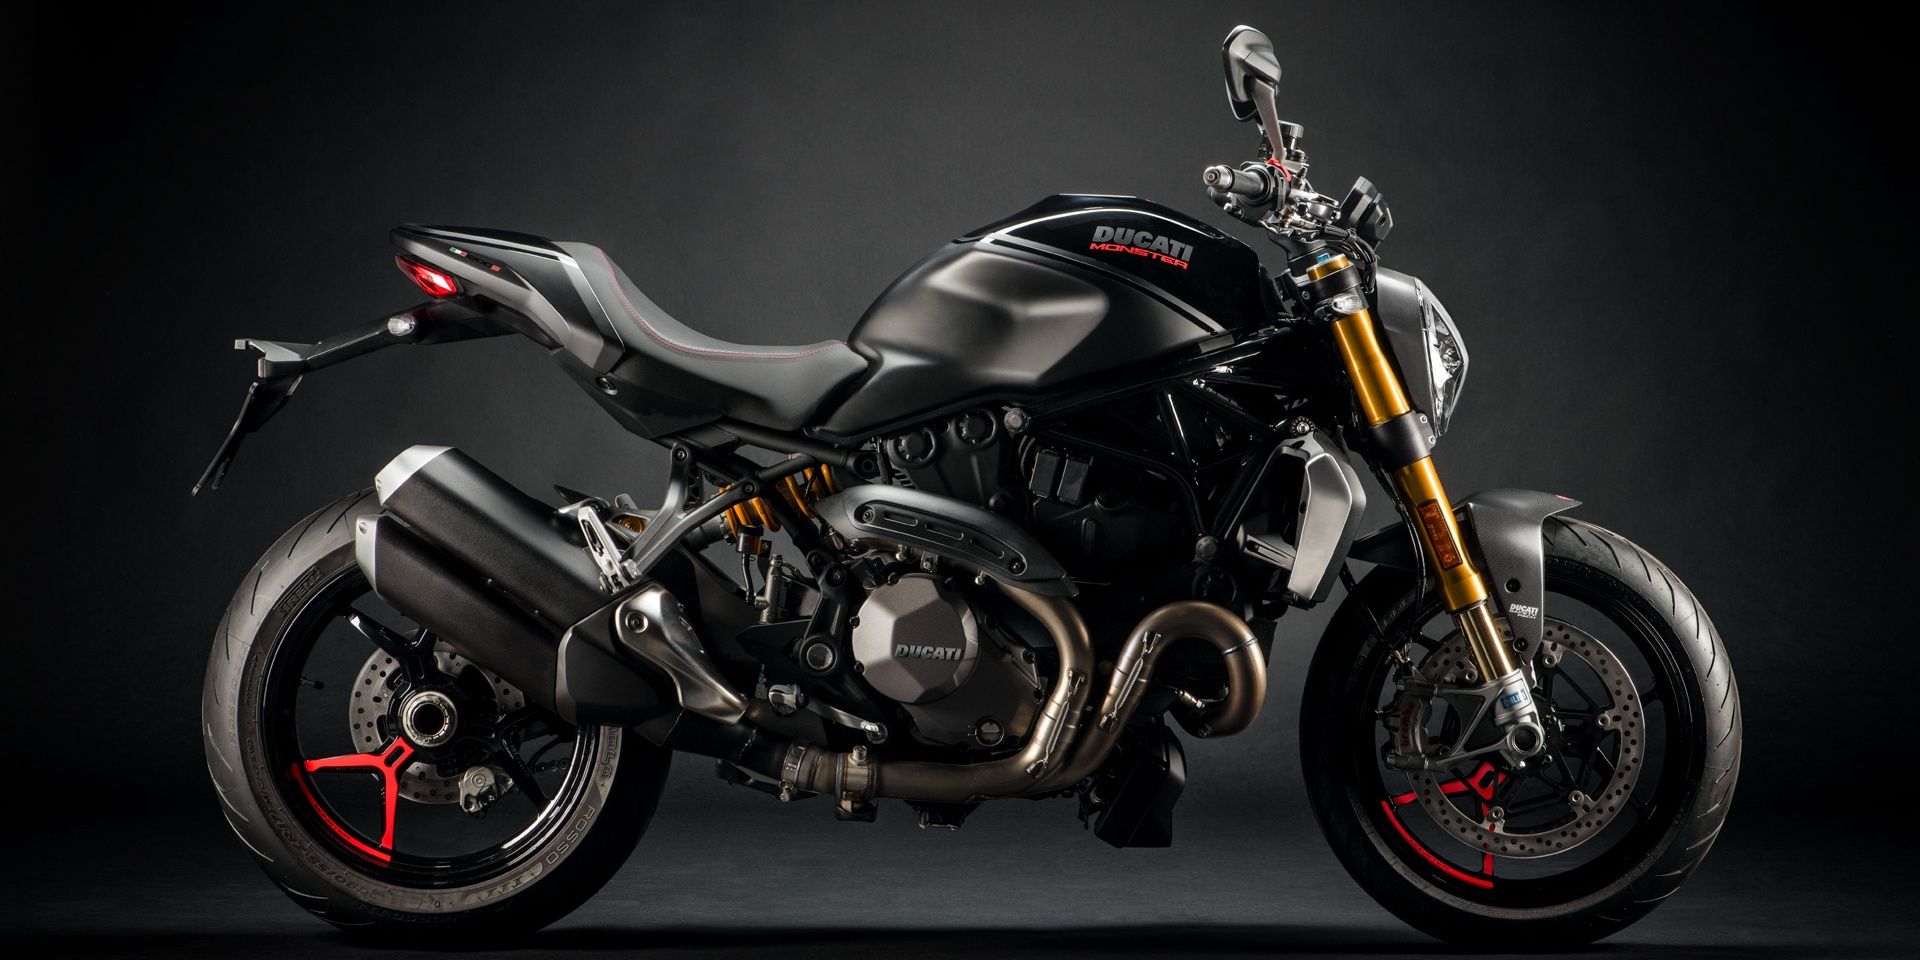 Ducati Monster 1200 side profile view